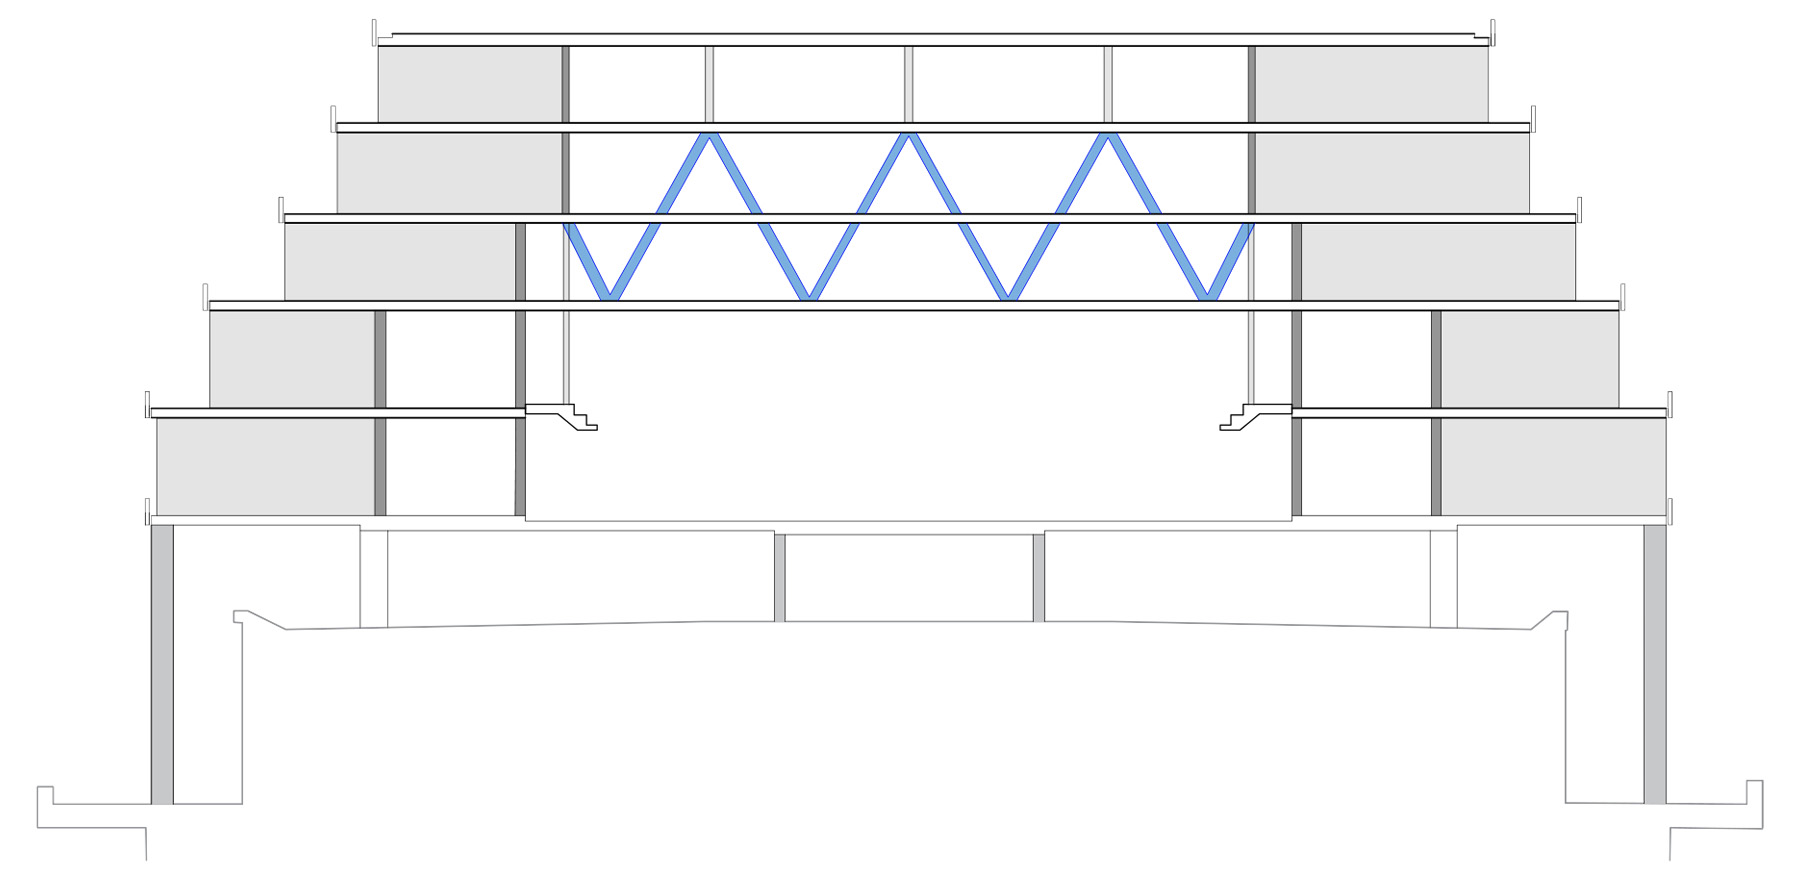 The drawing shows a close-up cutaway view of the steel truss supporting the floors above the two-story gymnasium. 